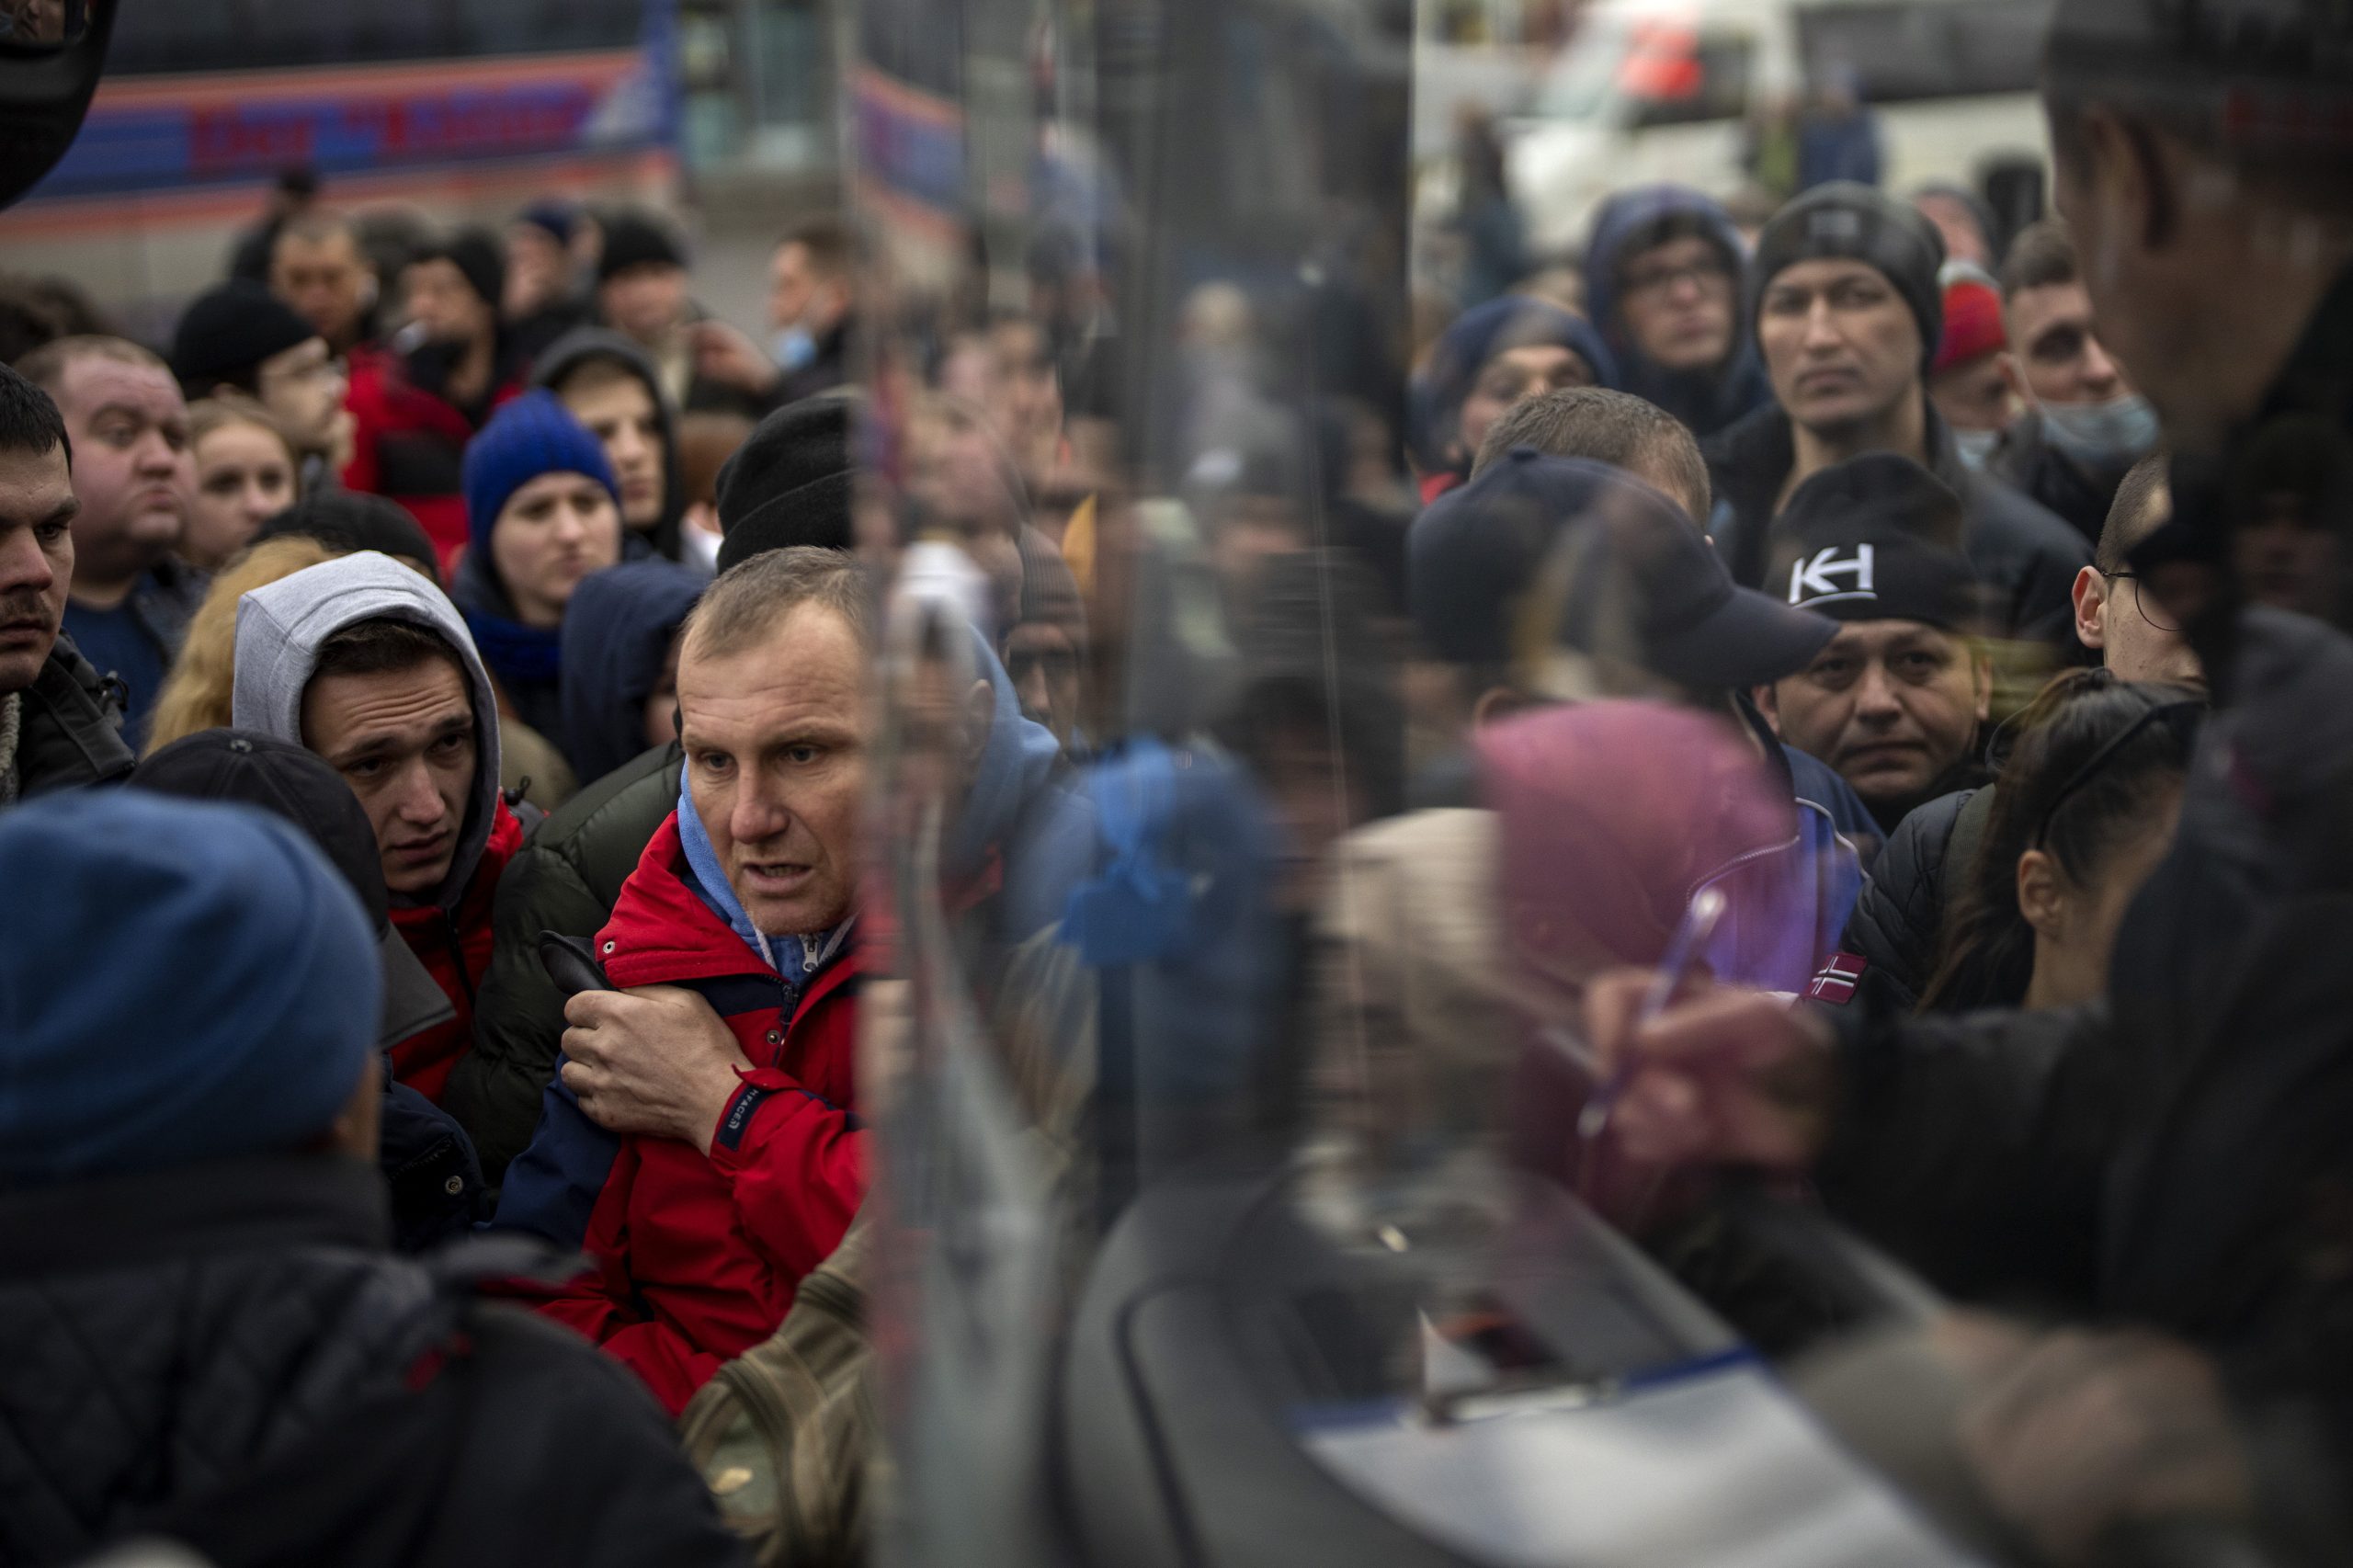 Hungary Allows Everyone Coming From Ukraine to Enter the Country